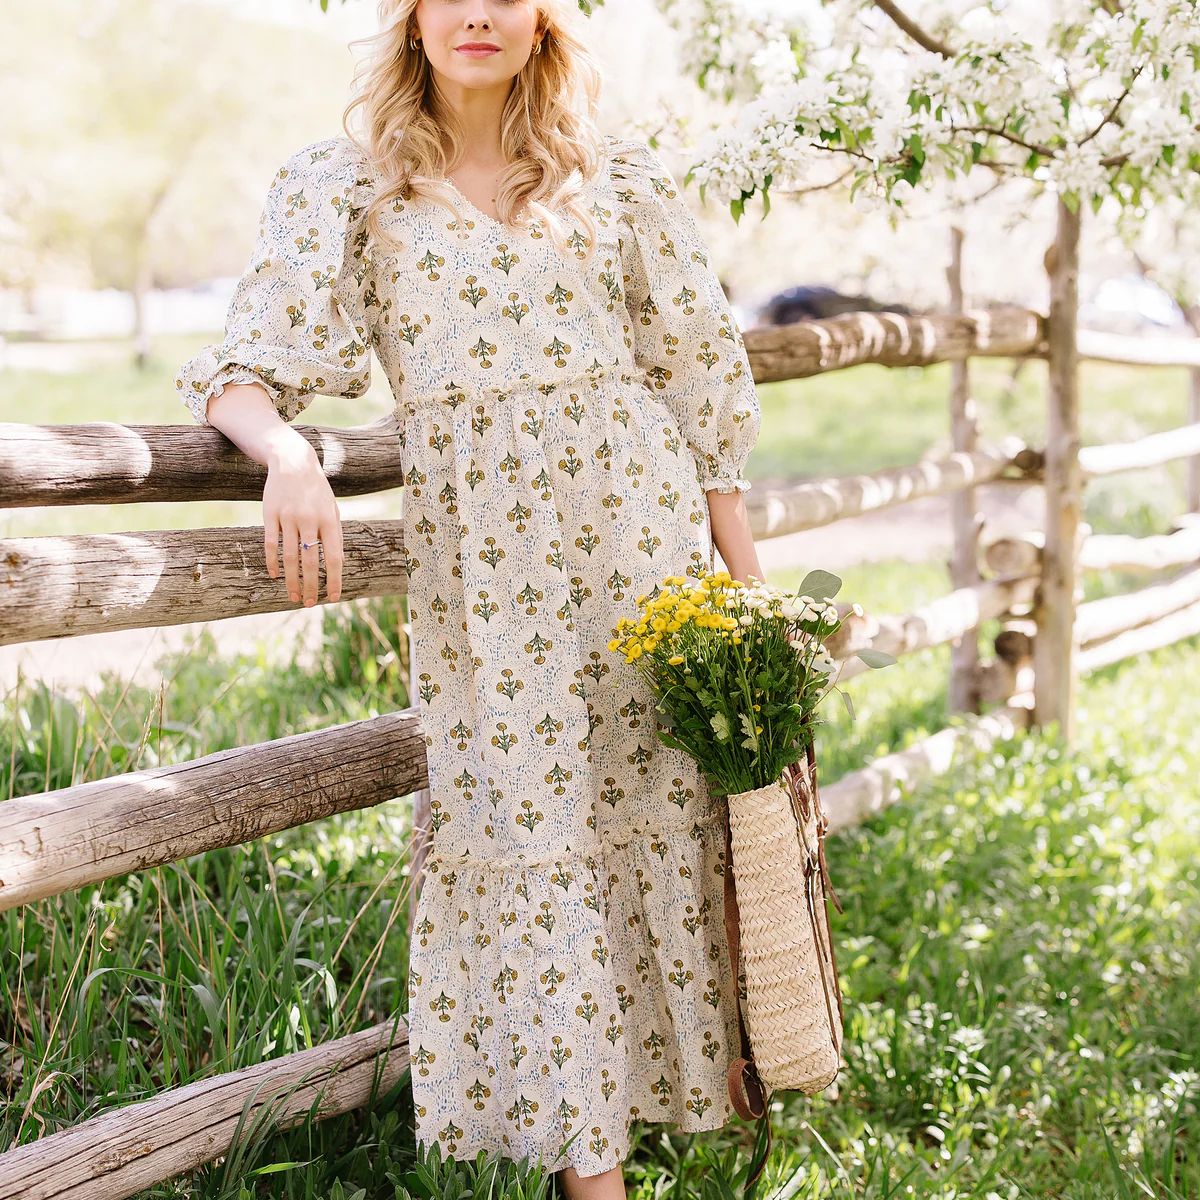 Stockplace The Label- The Chamomile Dress | Stockplace